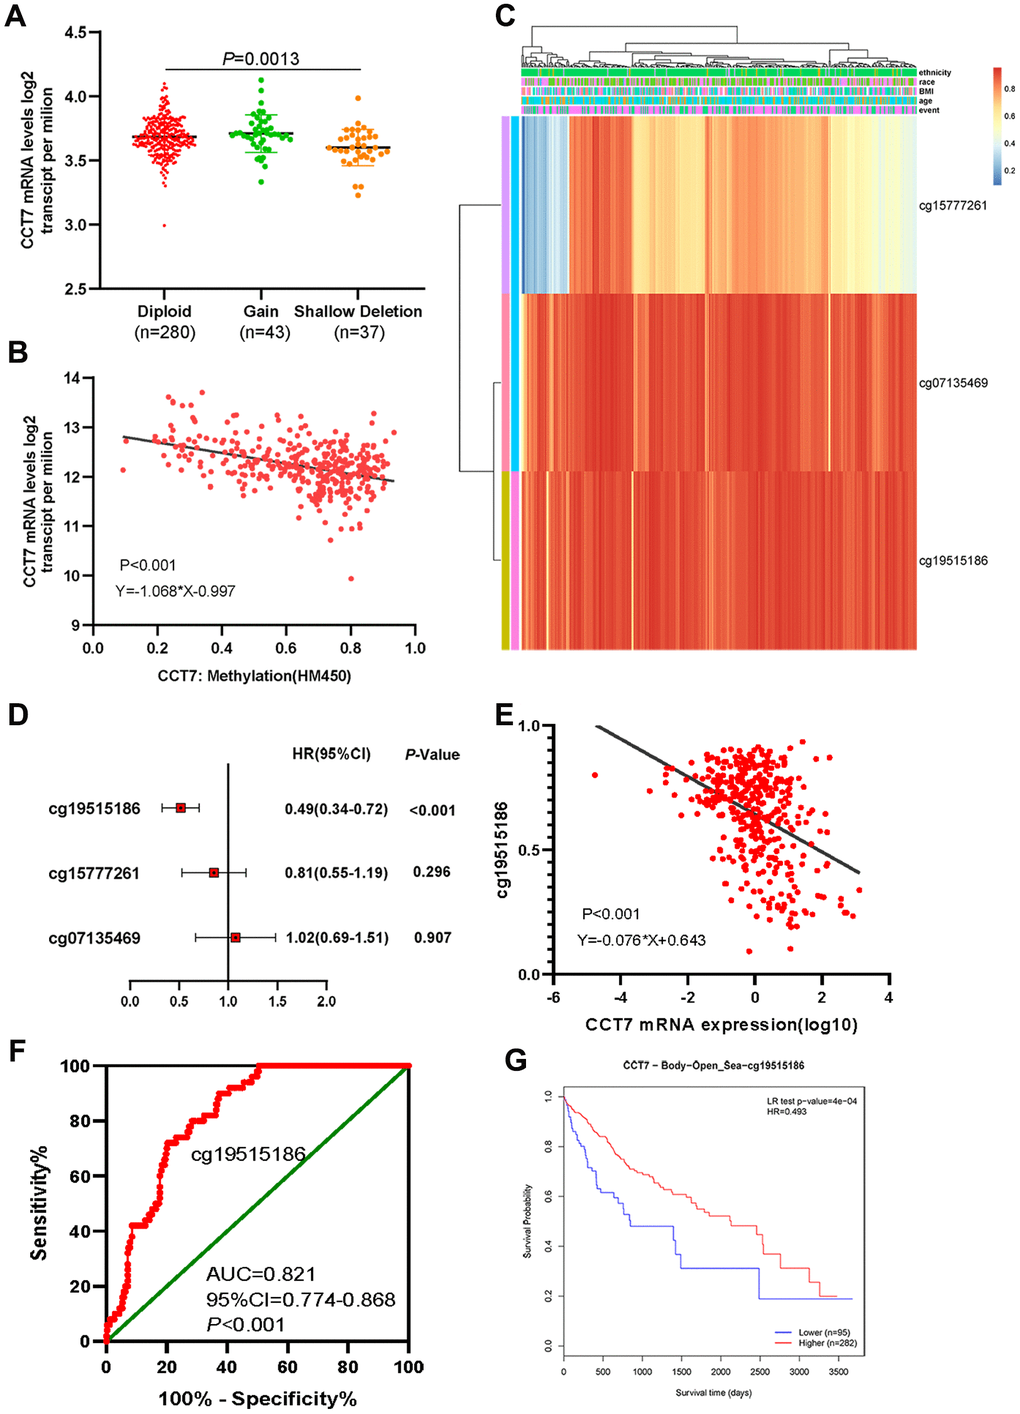 Dysregulated CCT7 expression is associated with DNA methylation status in HCC patients. (A) CCT7 mRNA expression in different copy number groups. (B) The correlation between CCT7 mRNA expression and DNA methylation status. (C) The heat map shows CCT7-related methylated CpG sites in HCC. (D) The forest map shows the correlation between CpG site methylation and survival times in HCC patients. (E) The correlation between CCT7 mRNA expression and cg19515186 methylation status. (F) ROC curve analysis showing the significant diagnostic value of cg19515186 methylation status for HCC in TCGA. (G) Survival analysis showing that higher methylation of cg19515186 was associated with better OS in HCC patients.